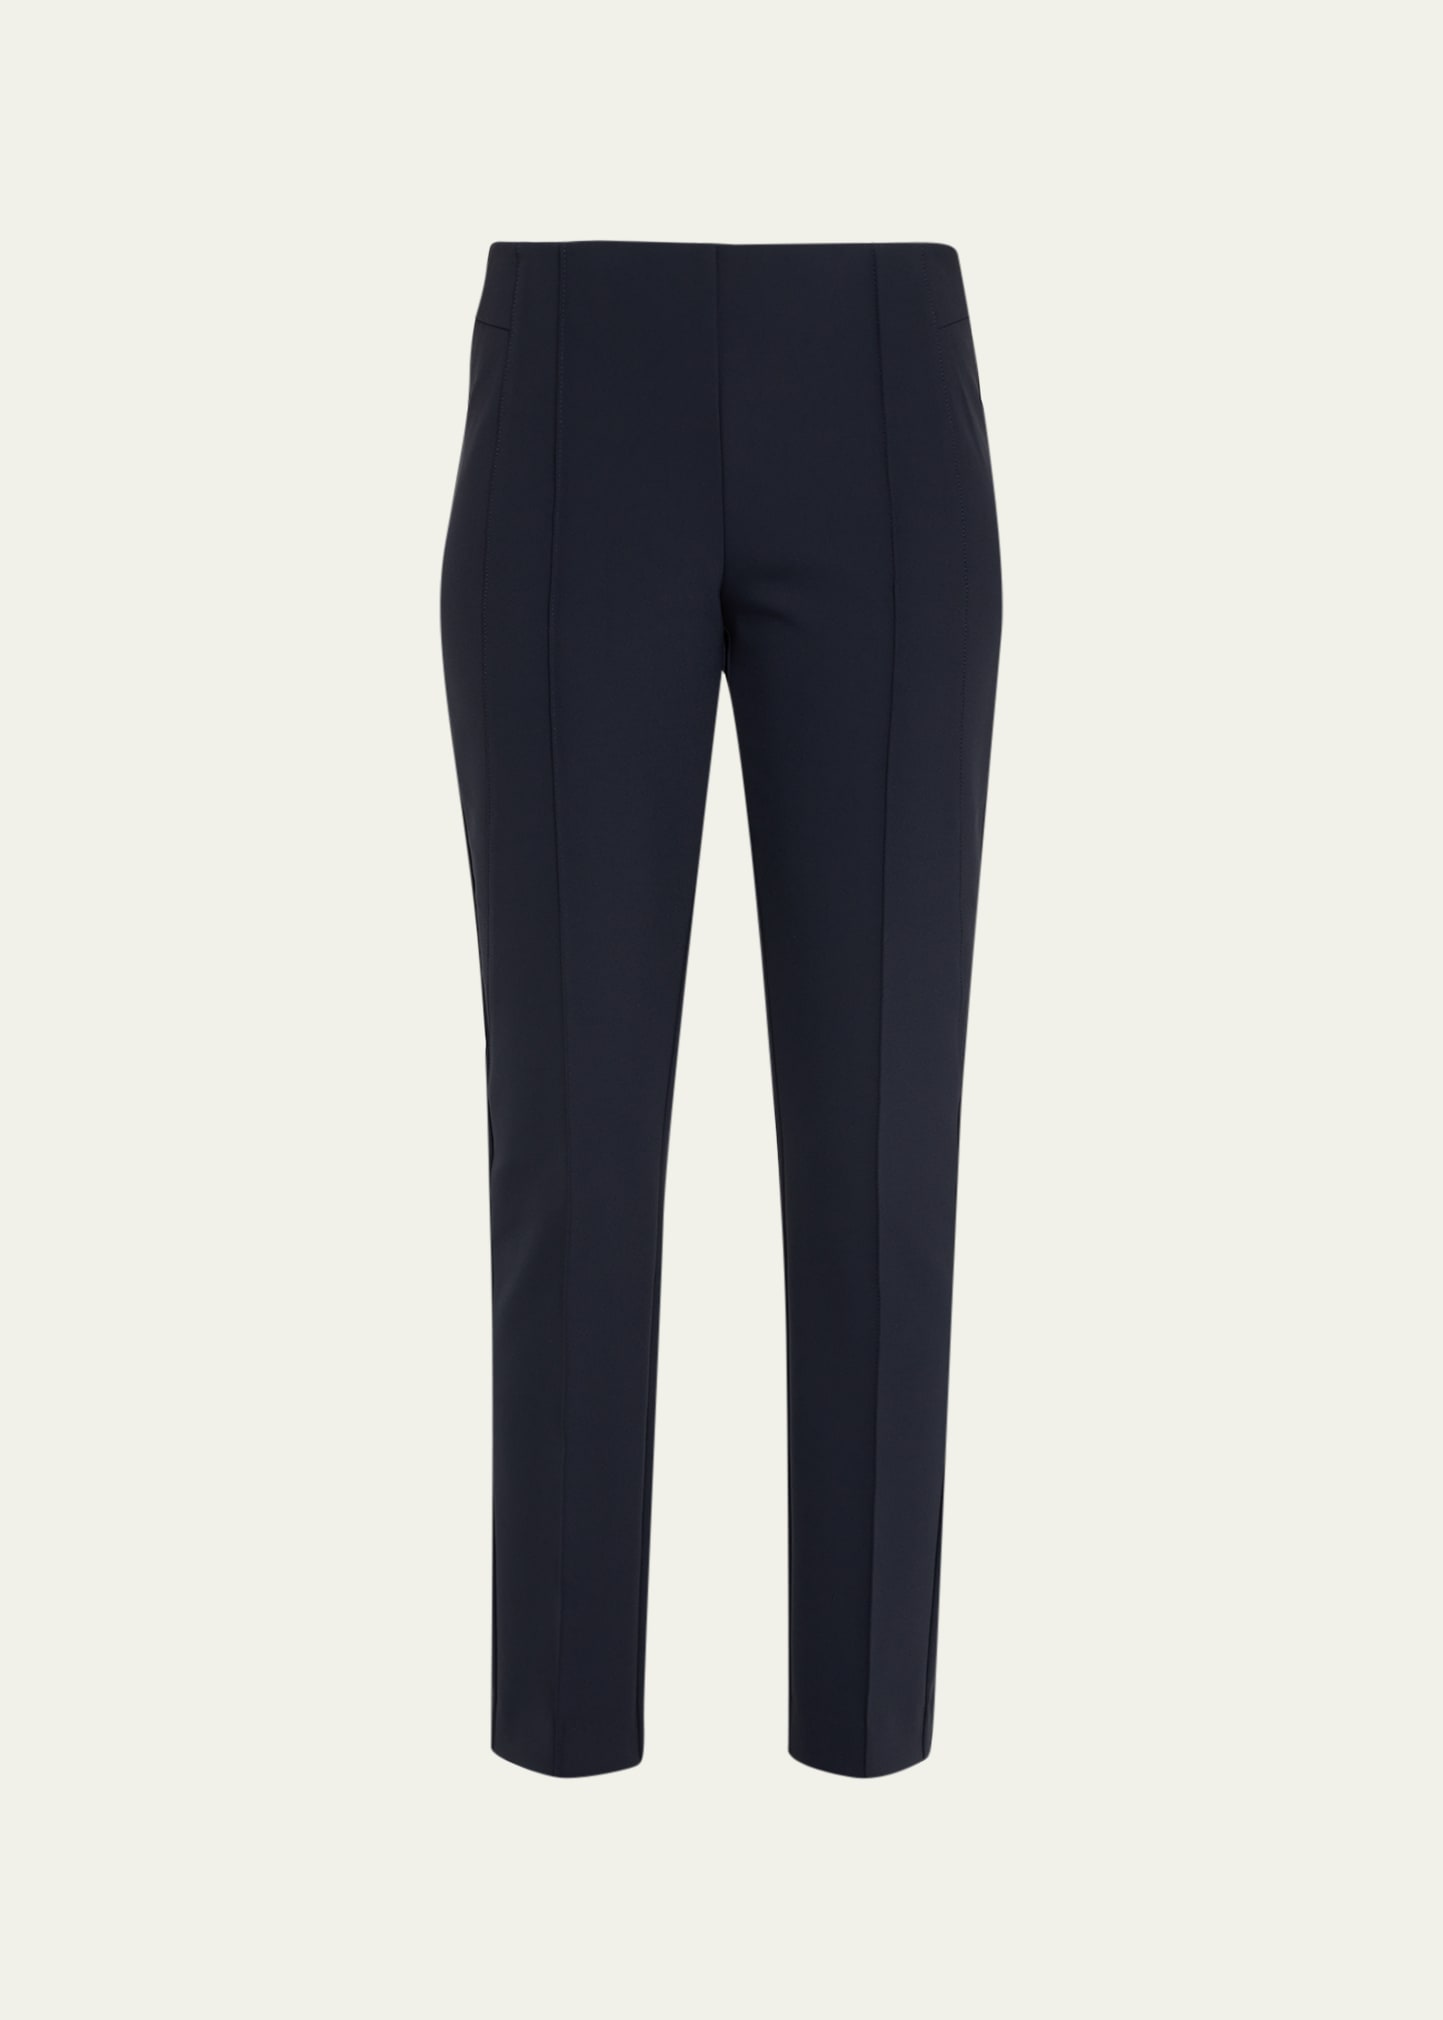 Gramercy Acclaimed-Stretch Pants